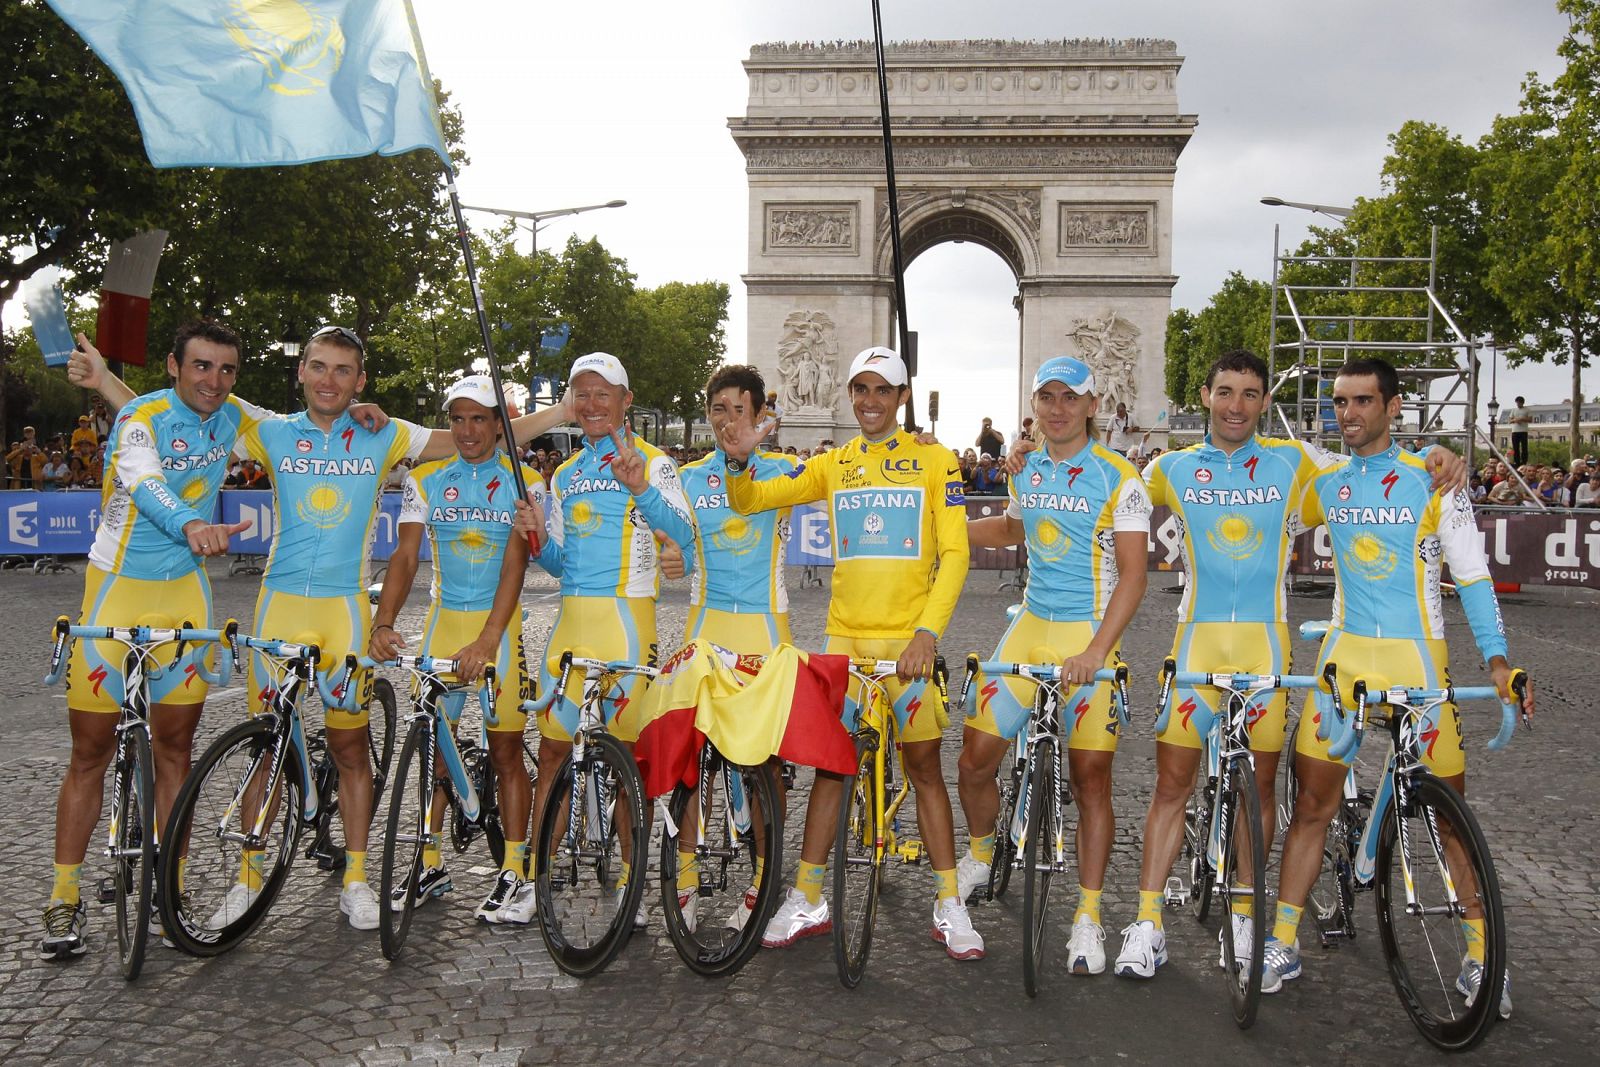 Astana team rider and leader's yellow jersey Alberto Contador of Spain poses with teammates in front the Arc de Triomphe on the Champs Elysees in Paris